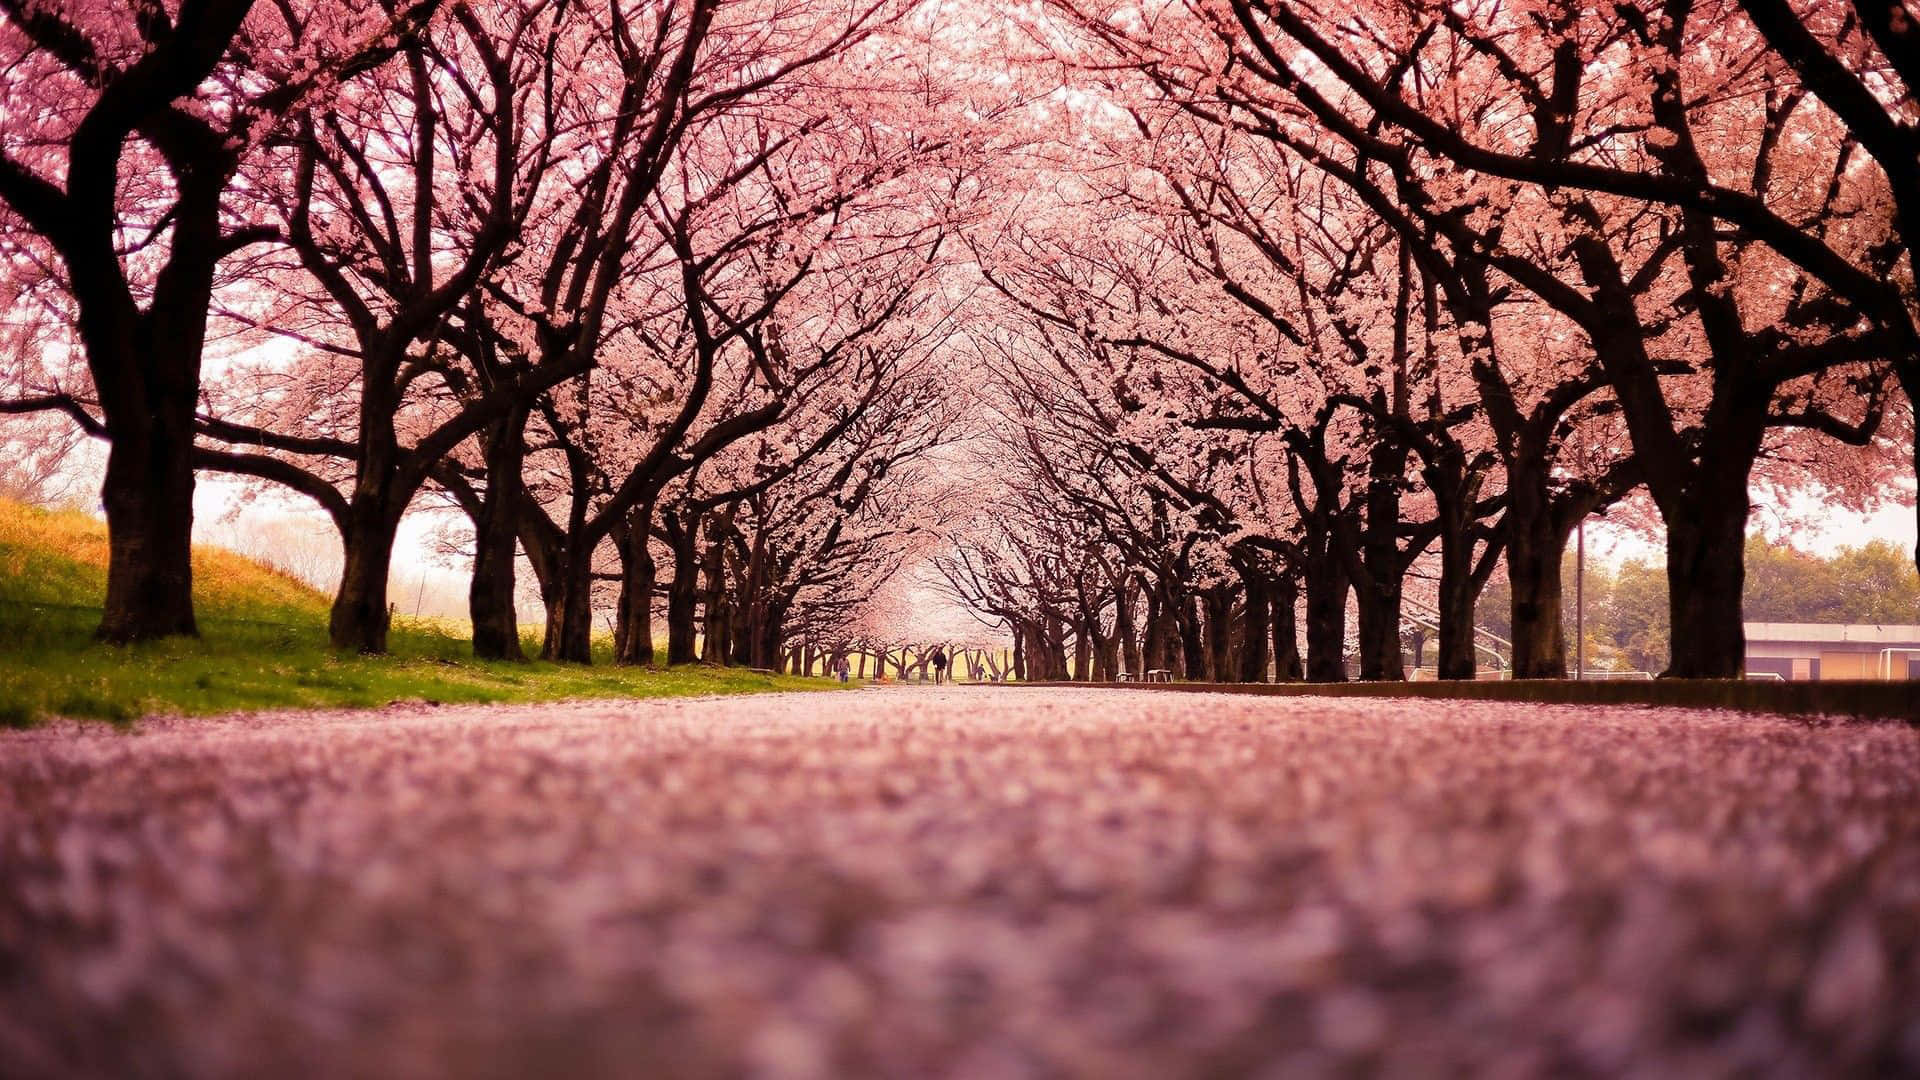 Image  Bright, Pink Cherry Blossoms Blooming in the Spring Wallpaper